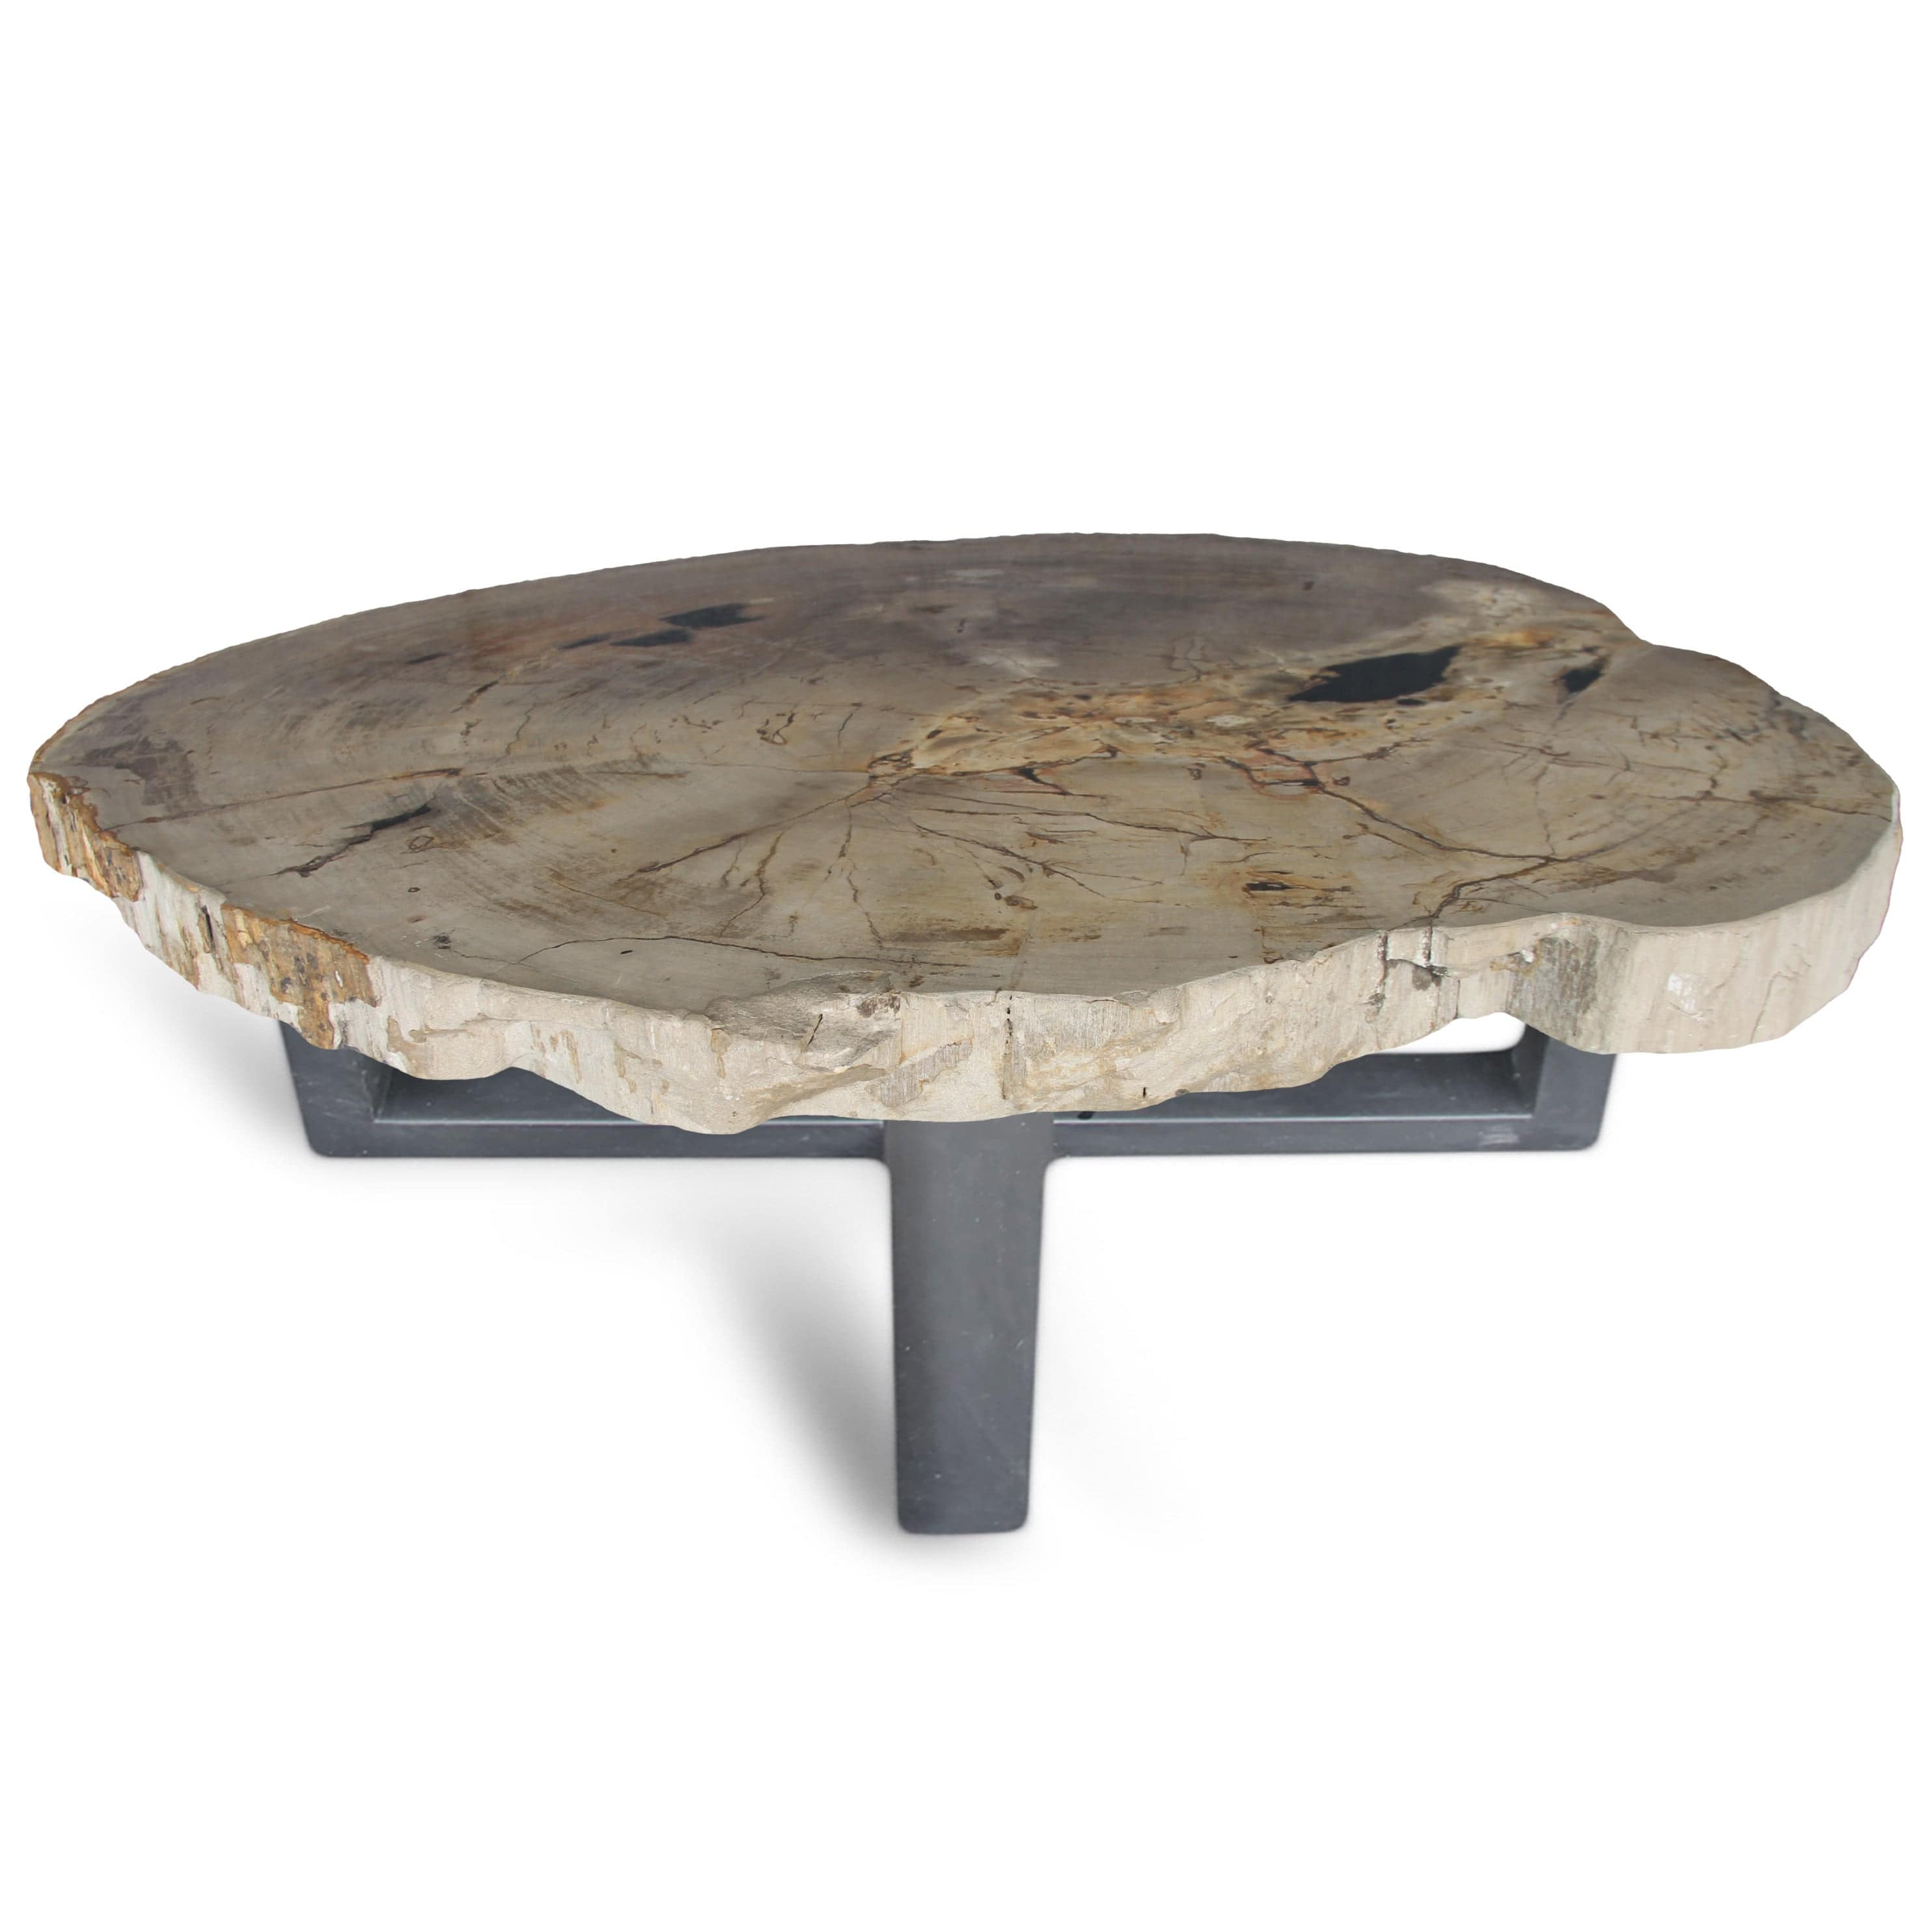 Kalifano Petrified Wood Petrified Wood Round Slab Coffee Table from Indonesia - 48" / 277 lbs PWT10200.003